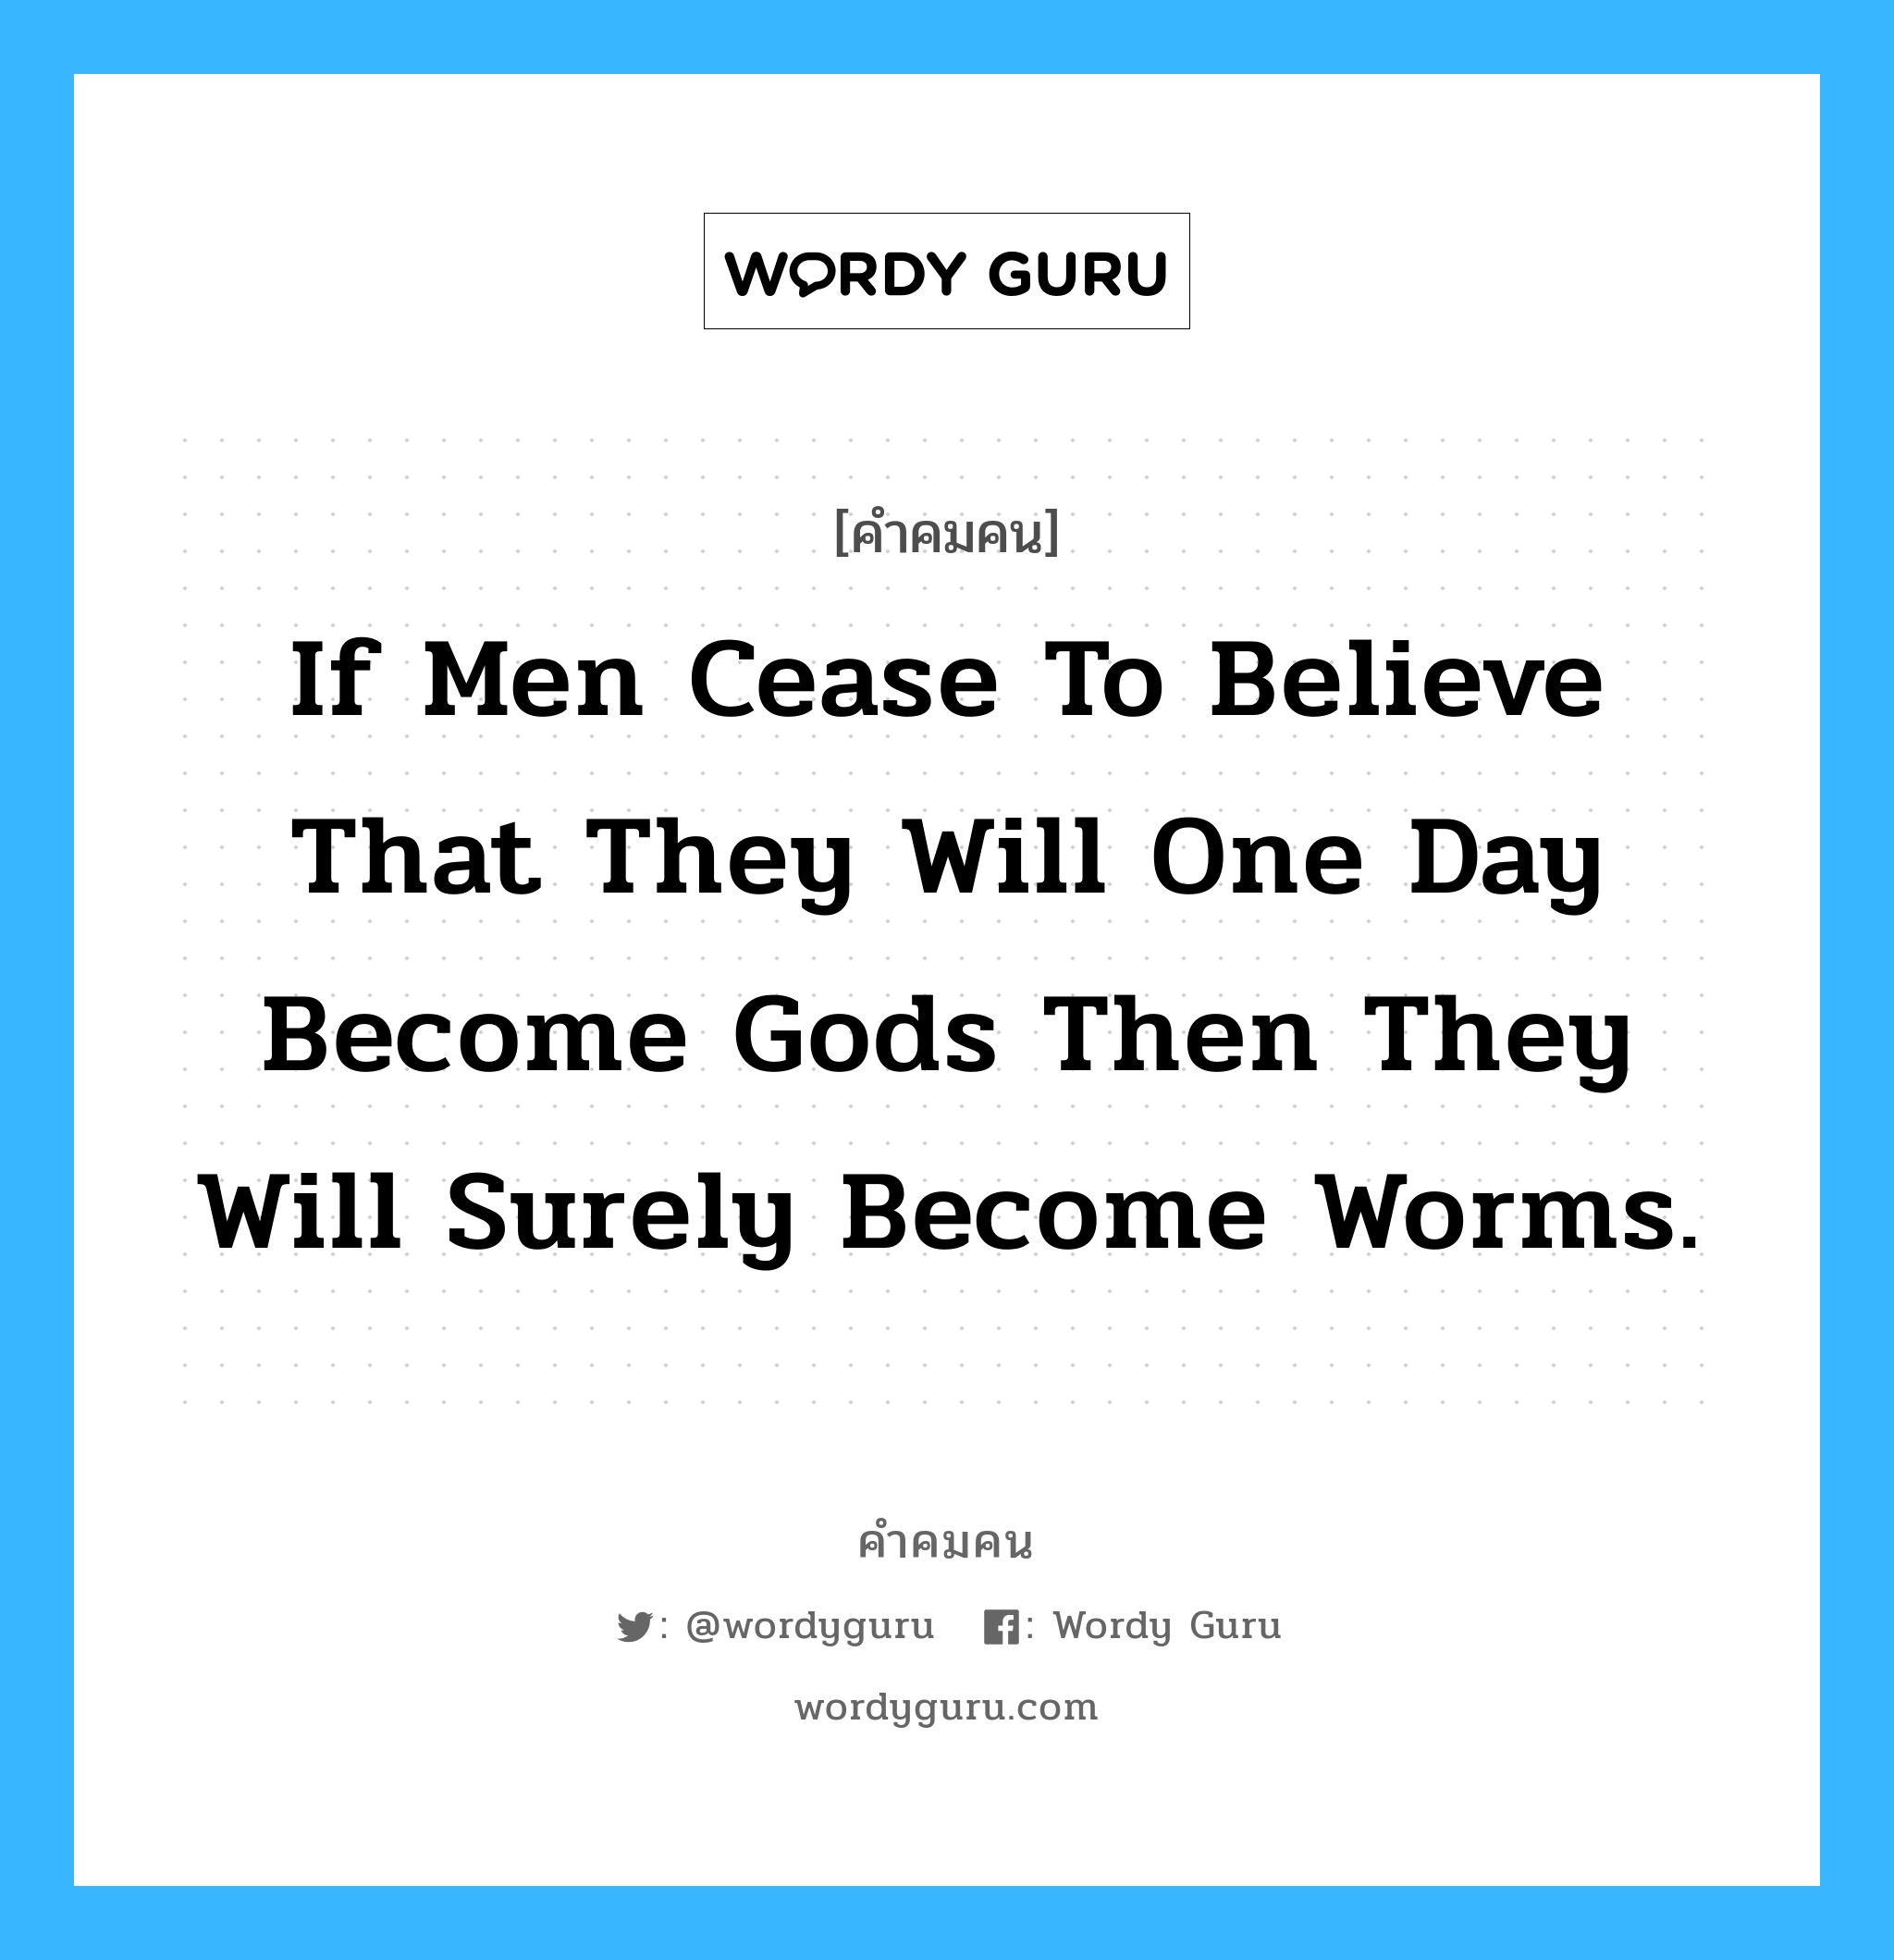 If men cease to believe that they will one day become gods then they will surely become worms., คำคมคน If men cease to believe that they will one day become gods then they will surely become worms. เมื่อมนุษย์เลิกเชื่อว่าวันหนึ่งเค้าจะกลายเป็นพระเจ้า เมื่อนั้น เค้าจะเป็นแค่หนอนตัวหนึ่งเท่านั้น Henry Miller หมวด Henry Miller